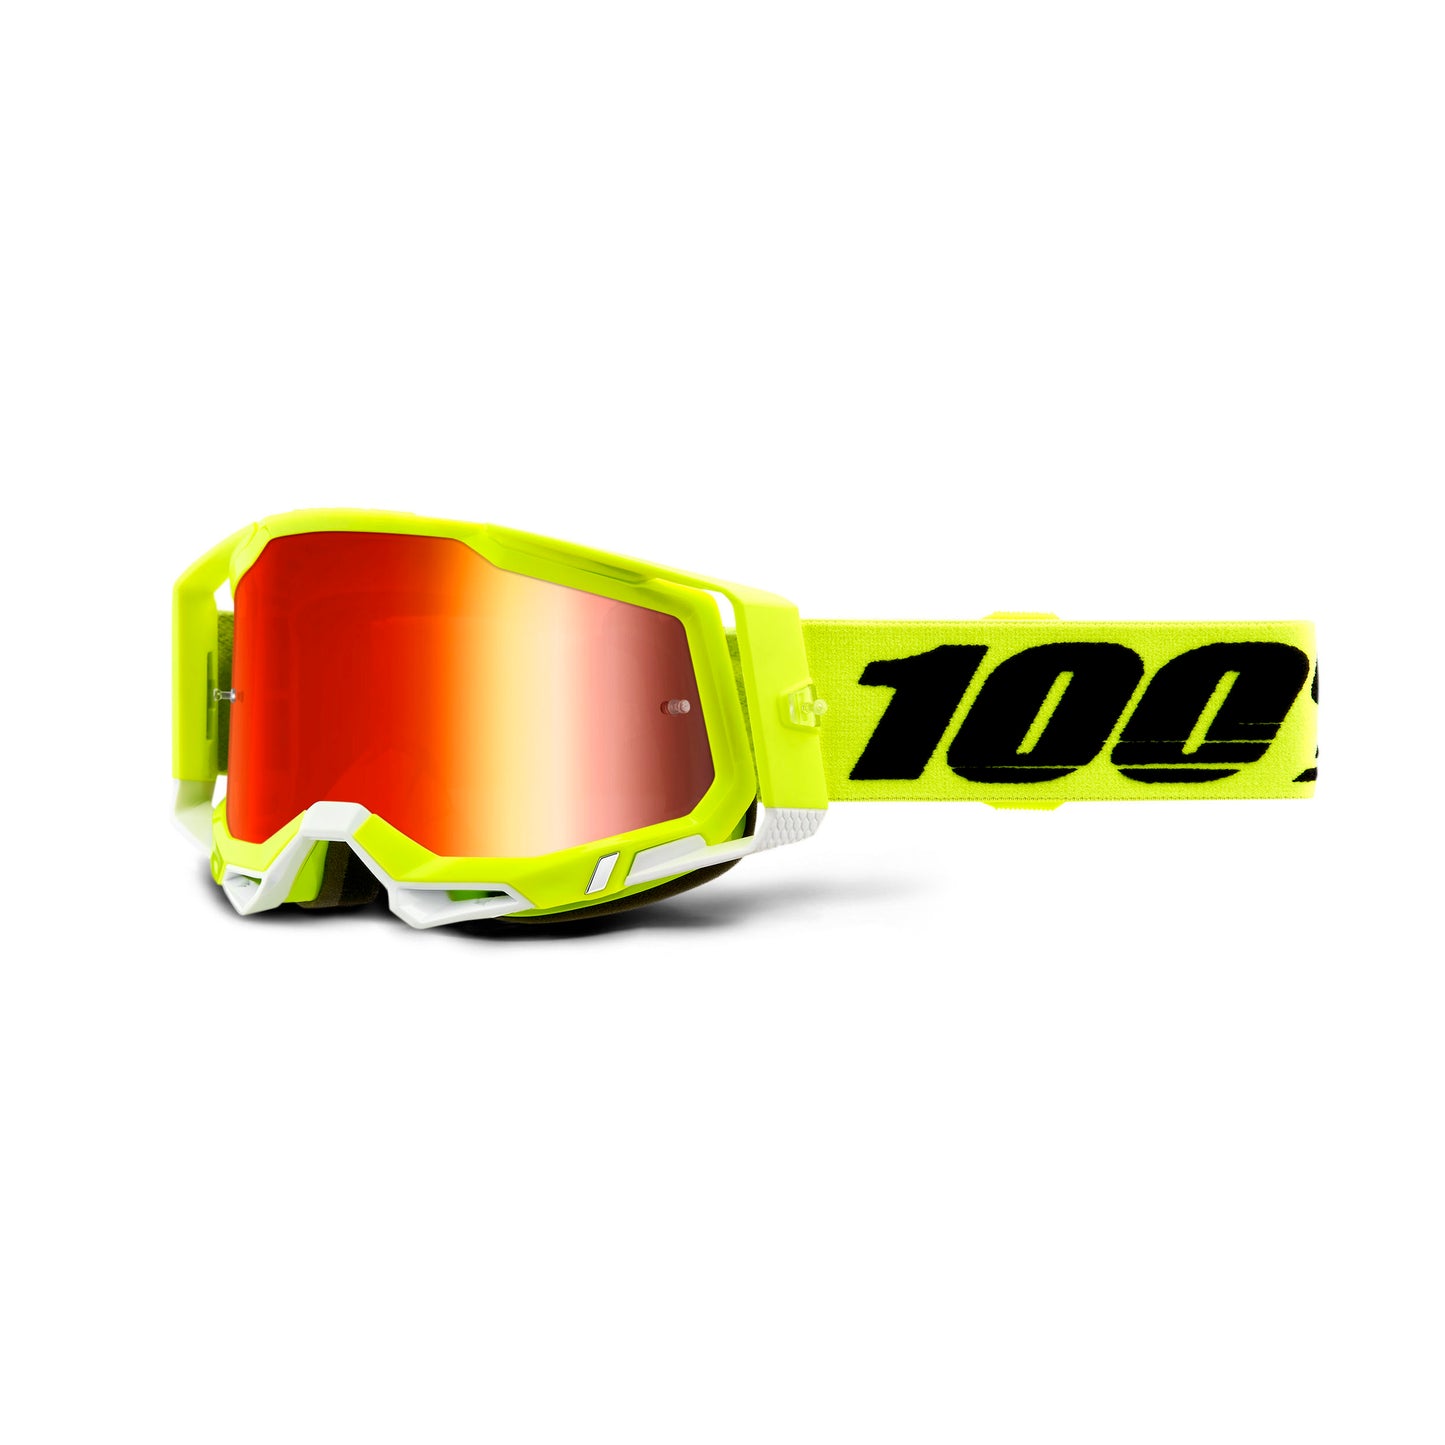 100 Percent Racecraft 2 Goggles - One Size Fits Most - Yellow - Red Mirror Lens